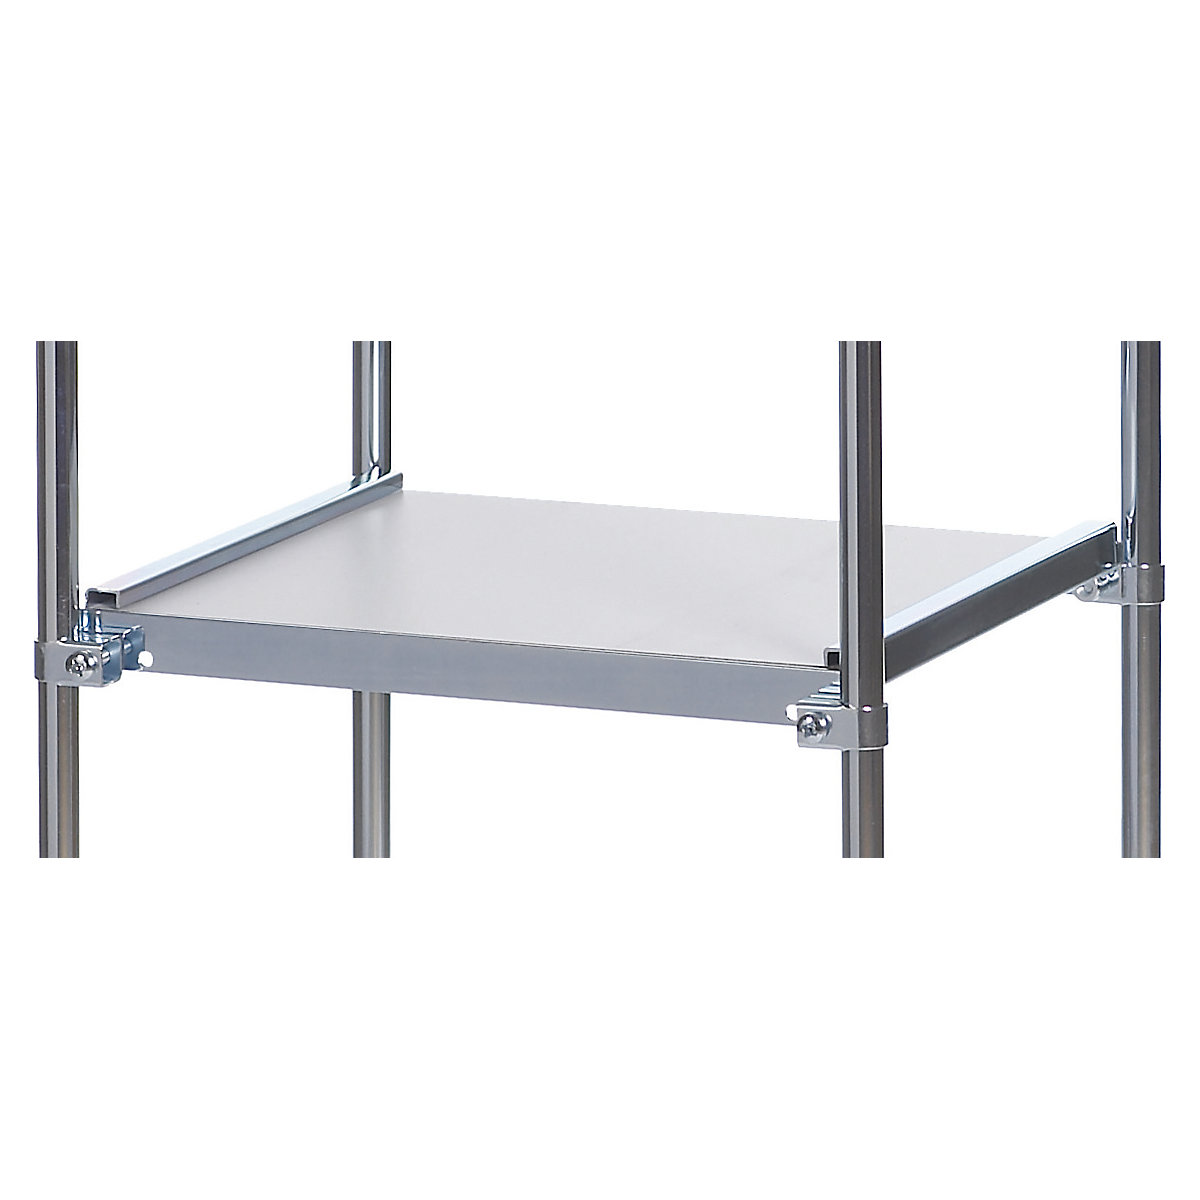 Shelf with supports – HelgeNyberg, LxW 360 x 420 mm, grey